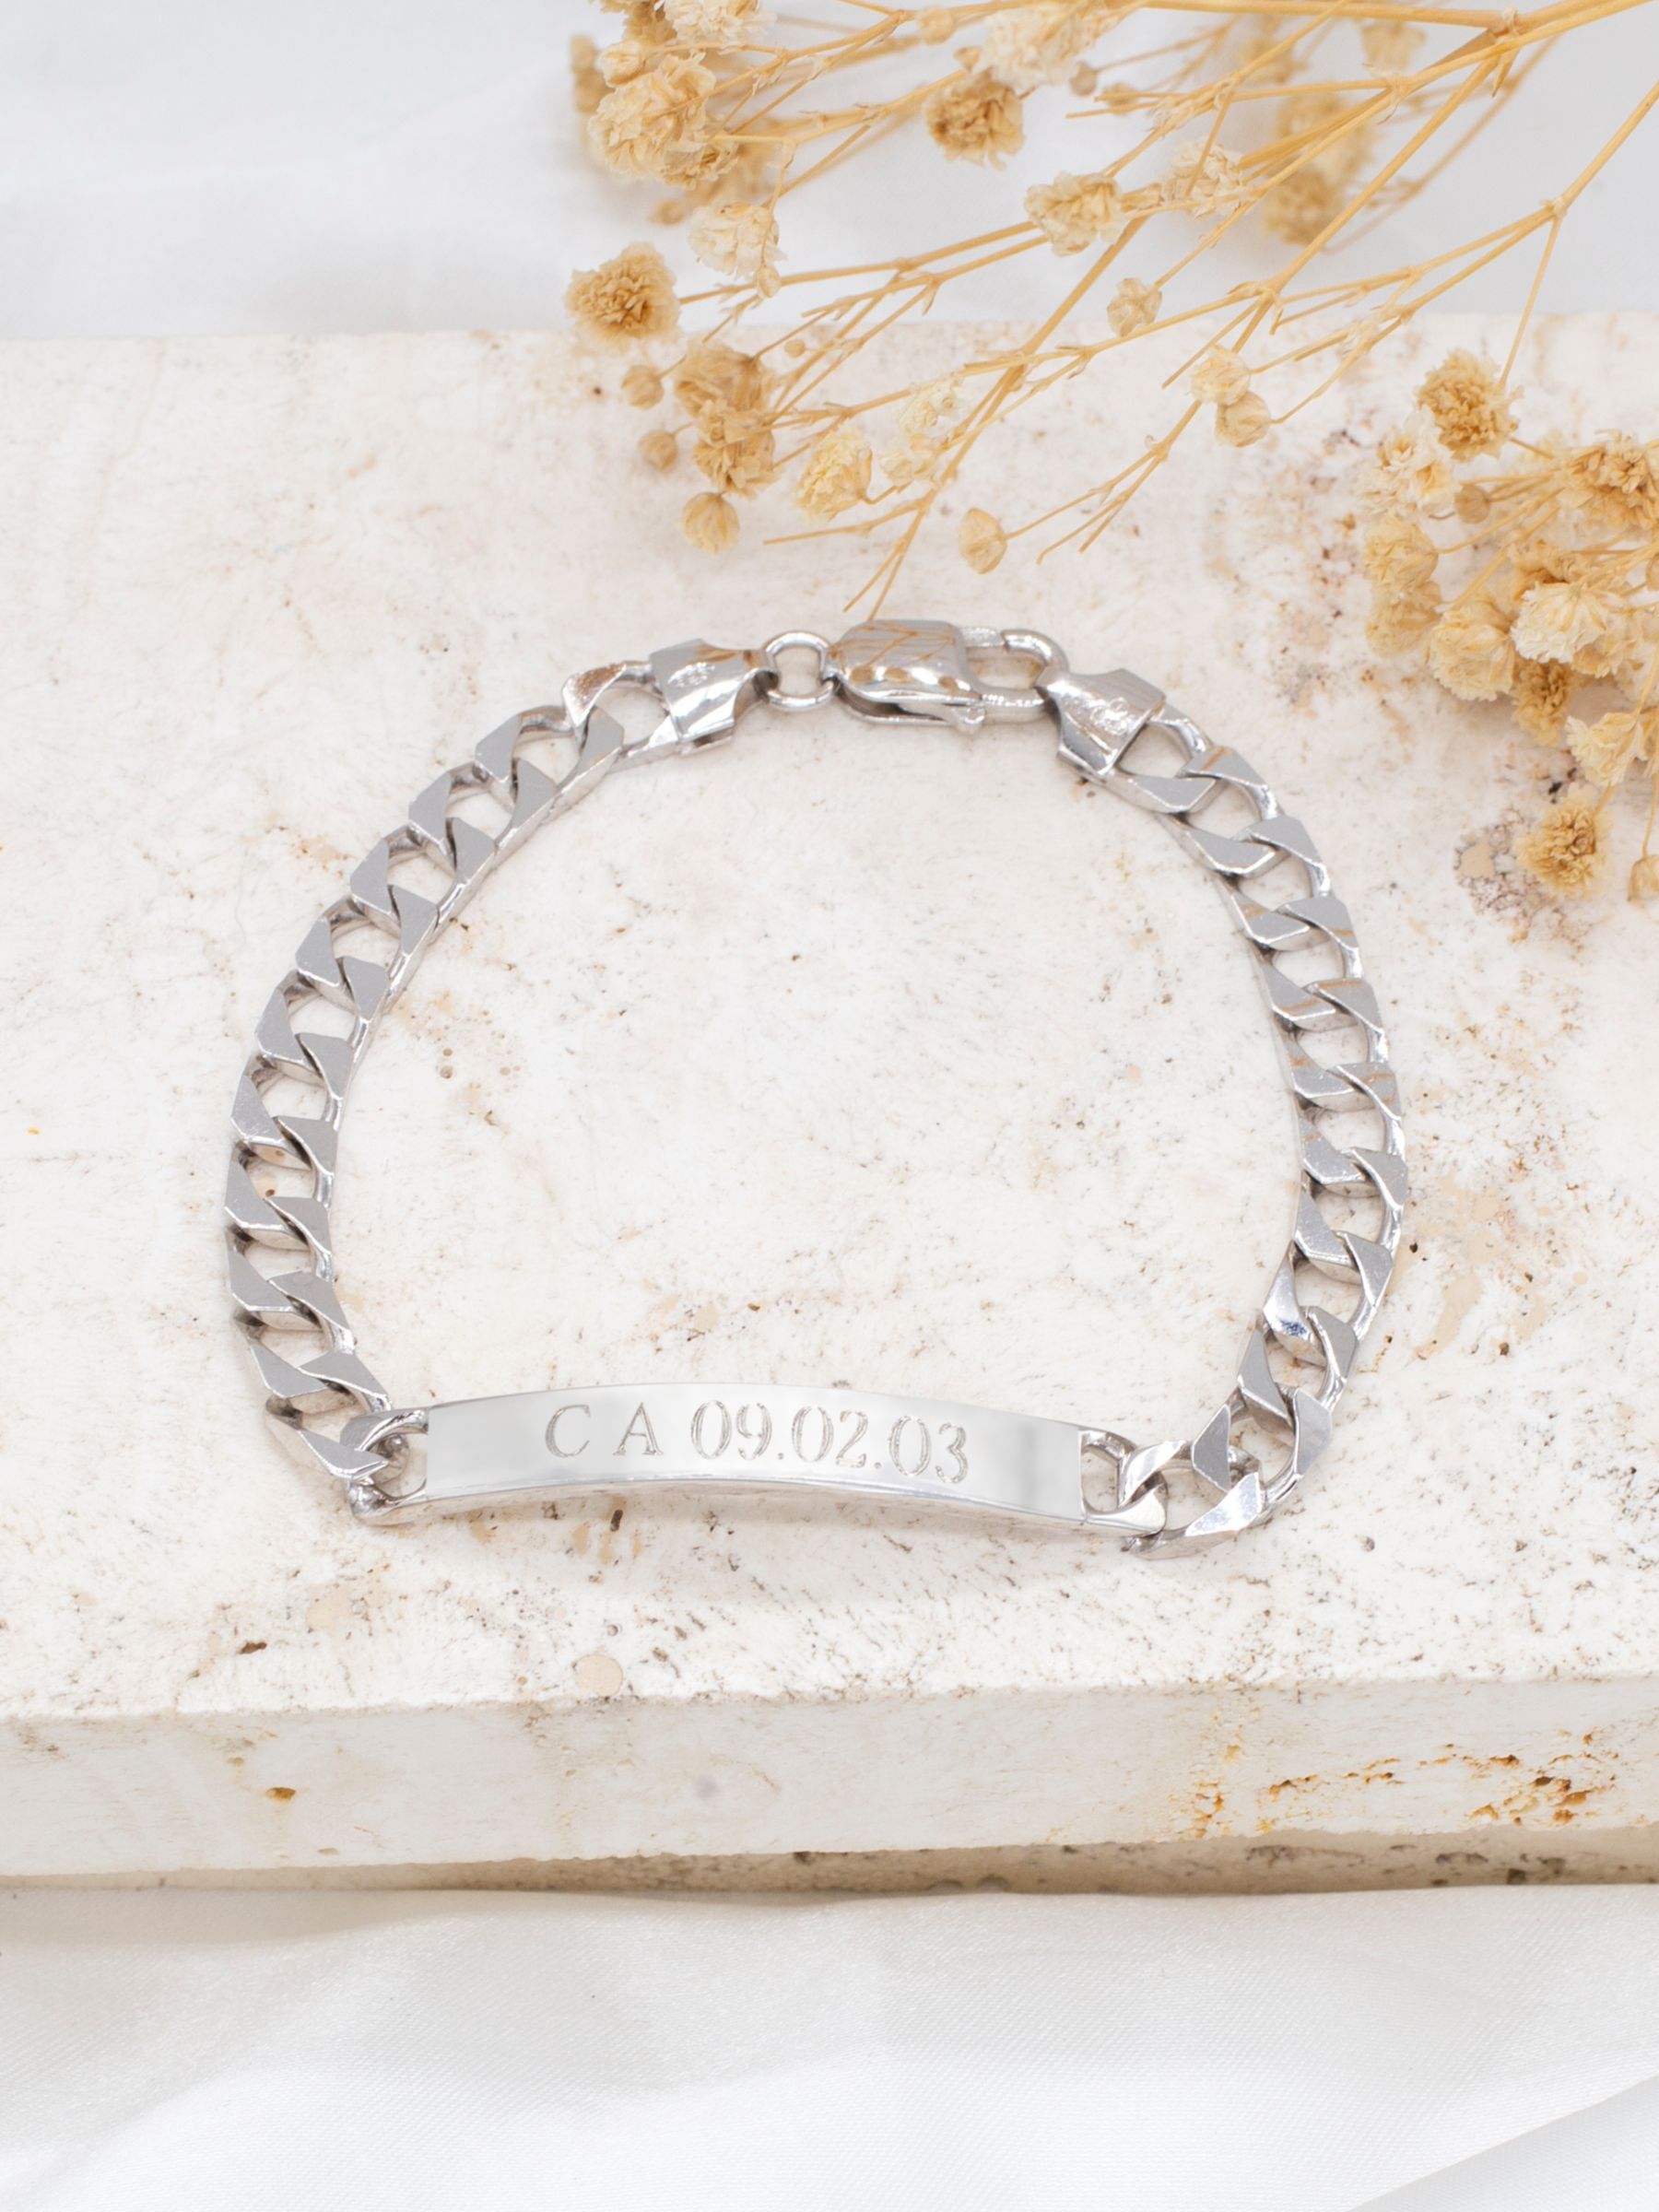 IBB Personalised Sterling Silver ID Curb Chain Bracelet, Silver